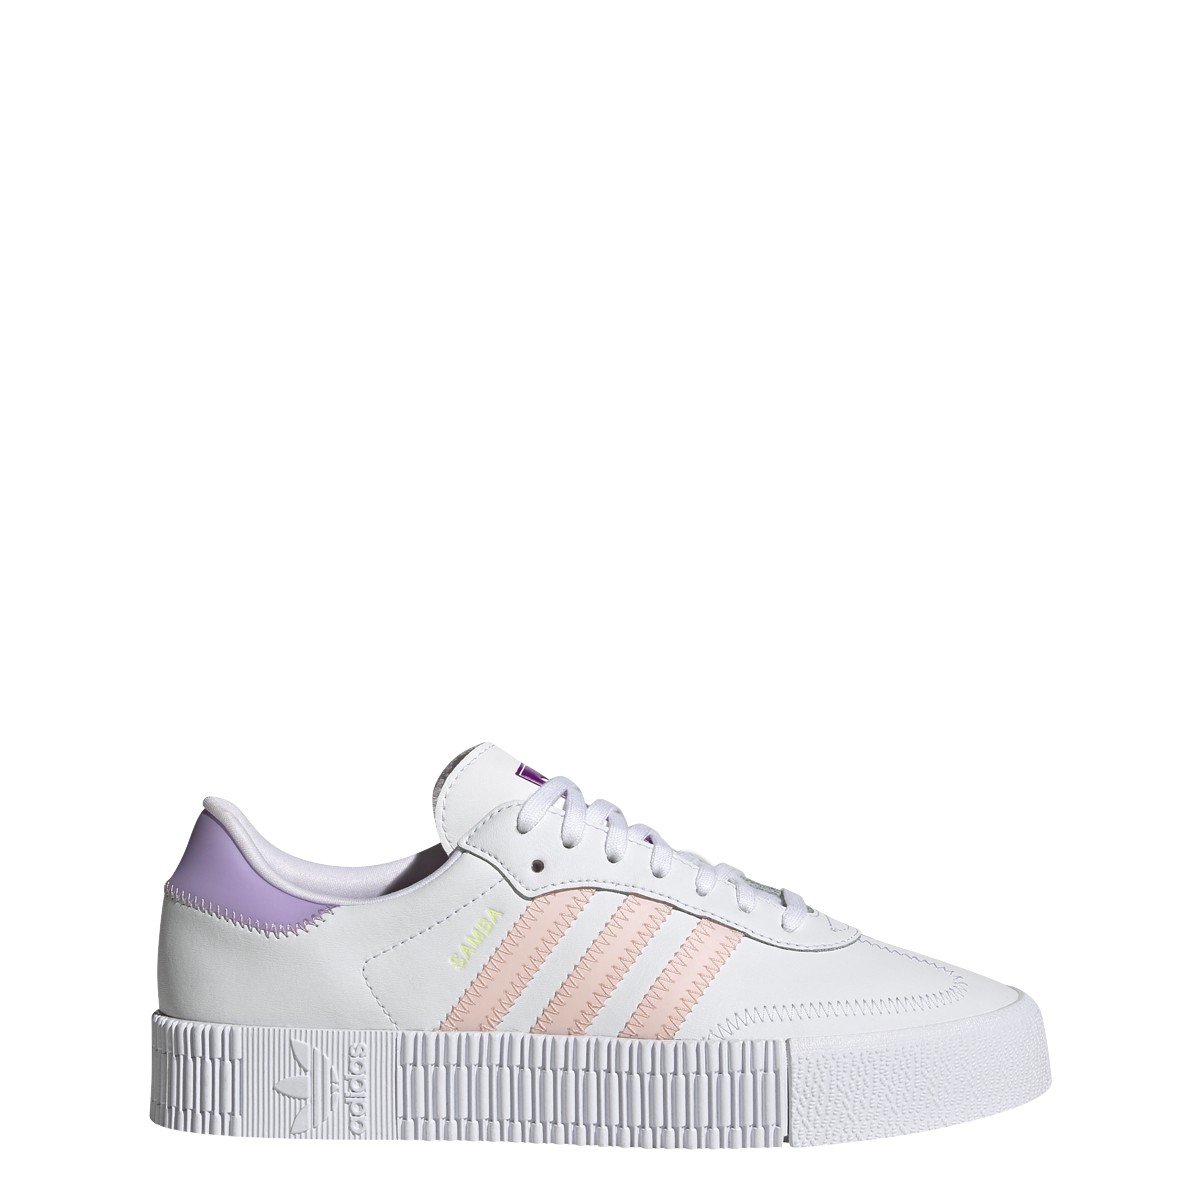 adidas - Fashion Sneakers , - Brands